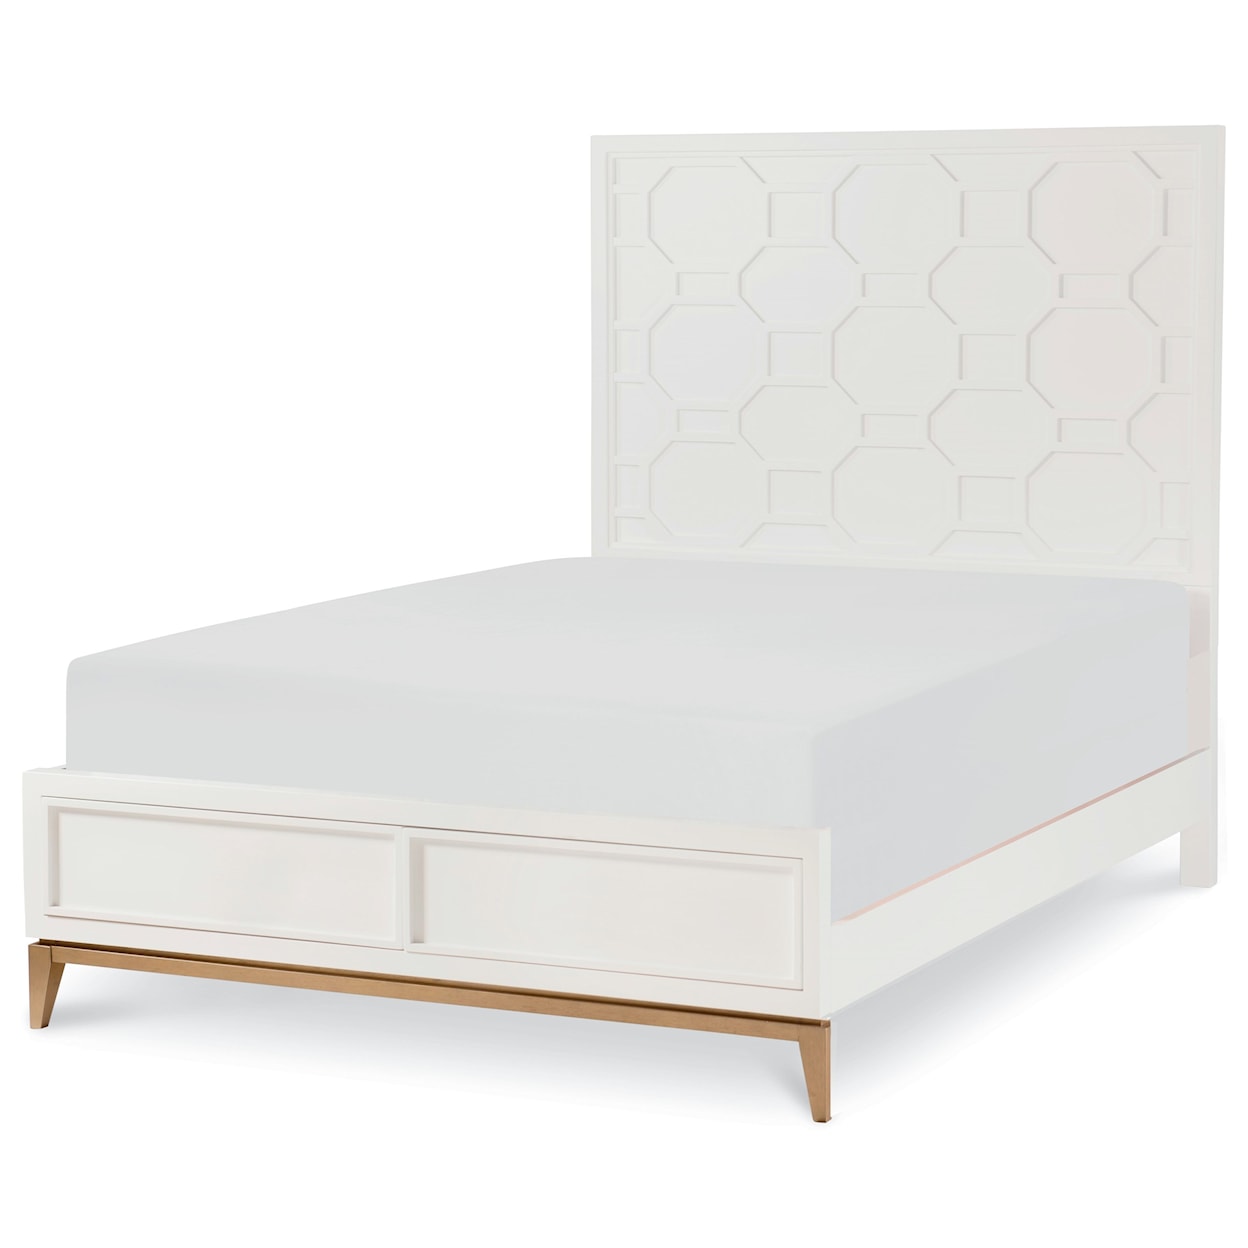 Rachael Ray Home Alexis Full Panel Bed